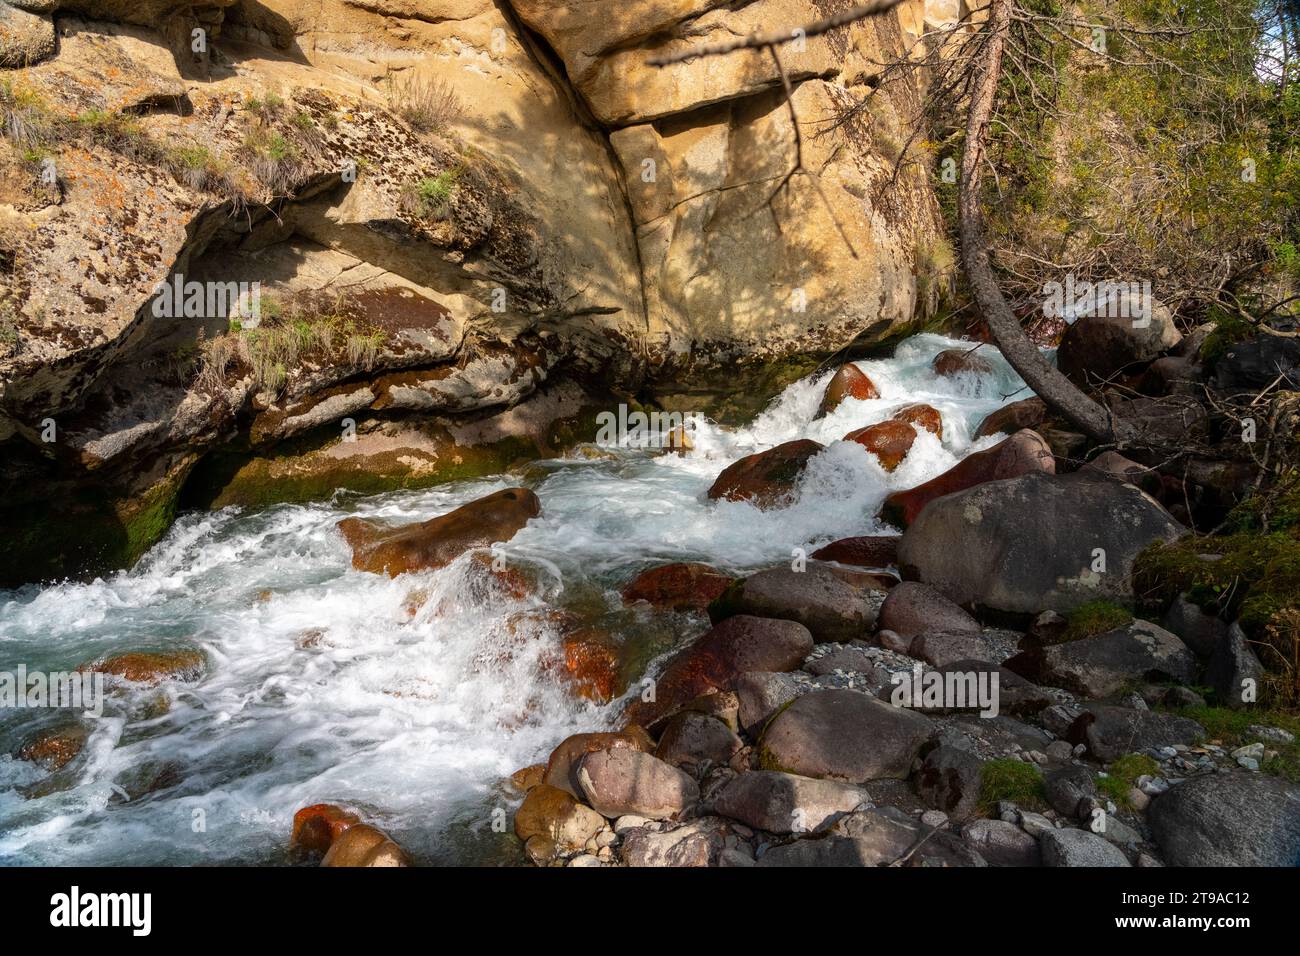 Gushing stream flowing in a valley in a mountain range in Kyrgyzstan, Stock Photo